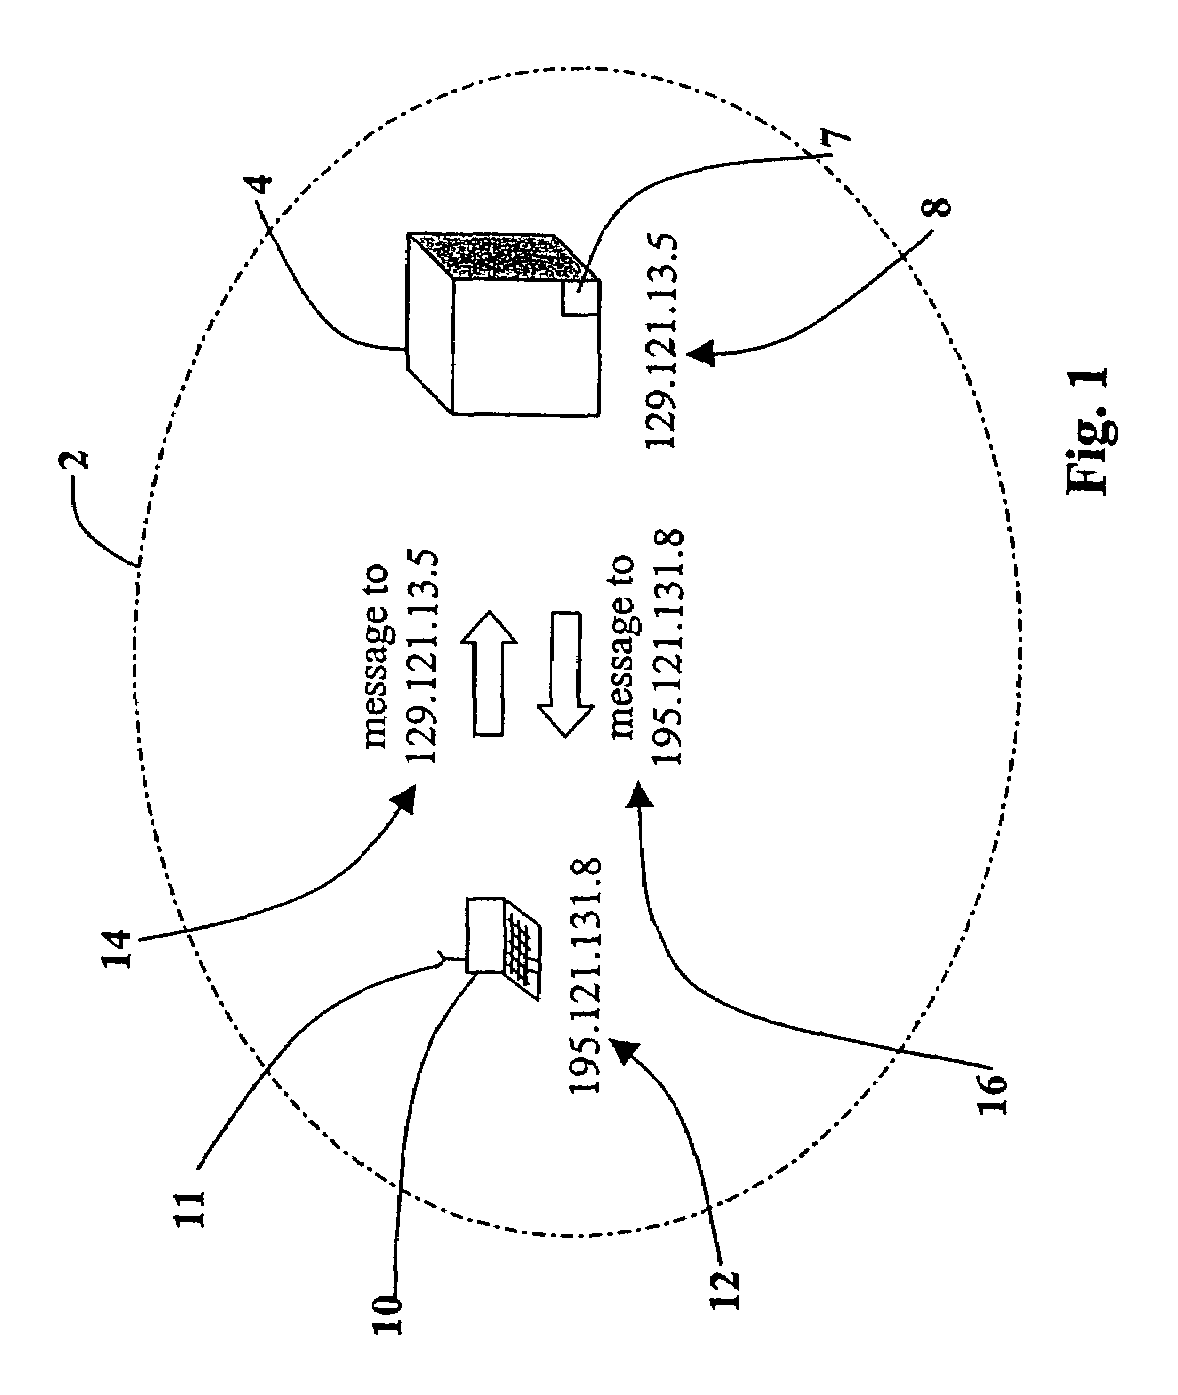 System for creating a wireless IP network connection after pre-allocating wireless network bandwidth available to a computing device